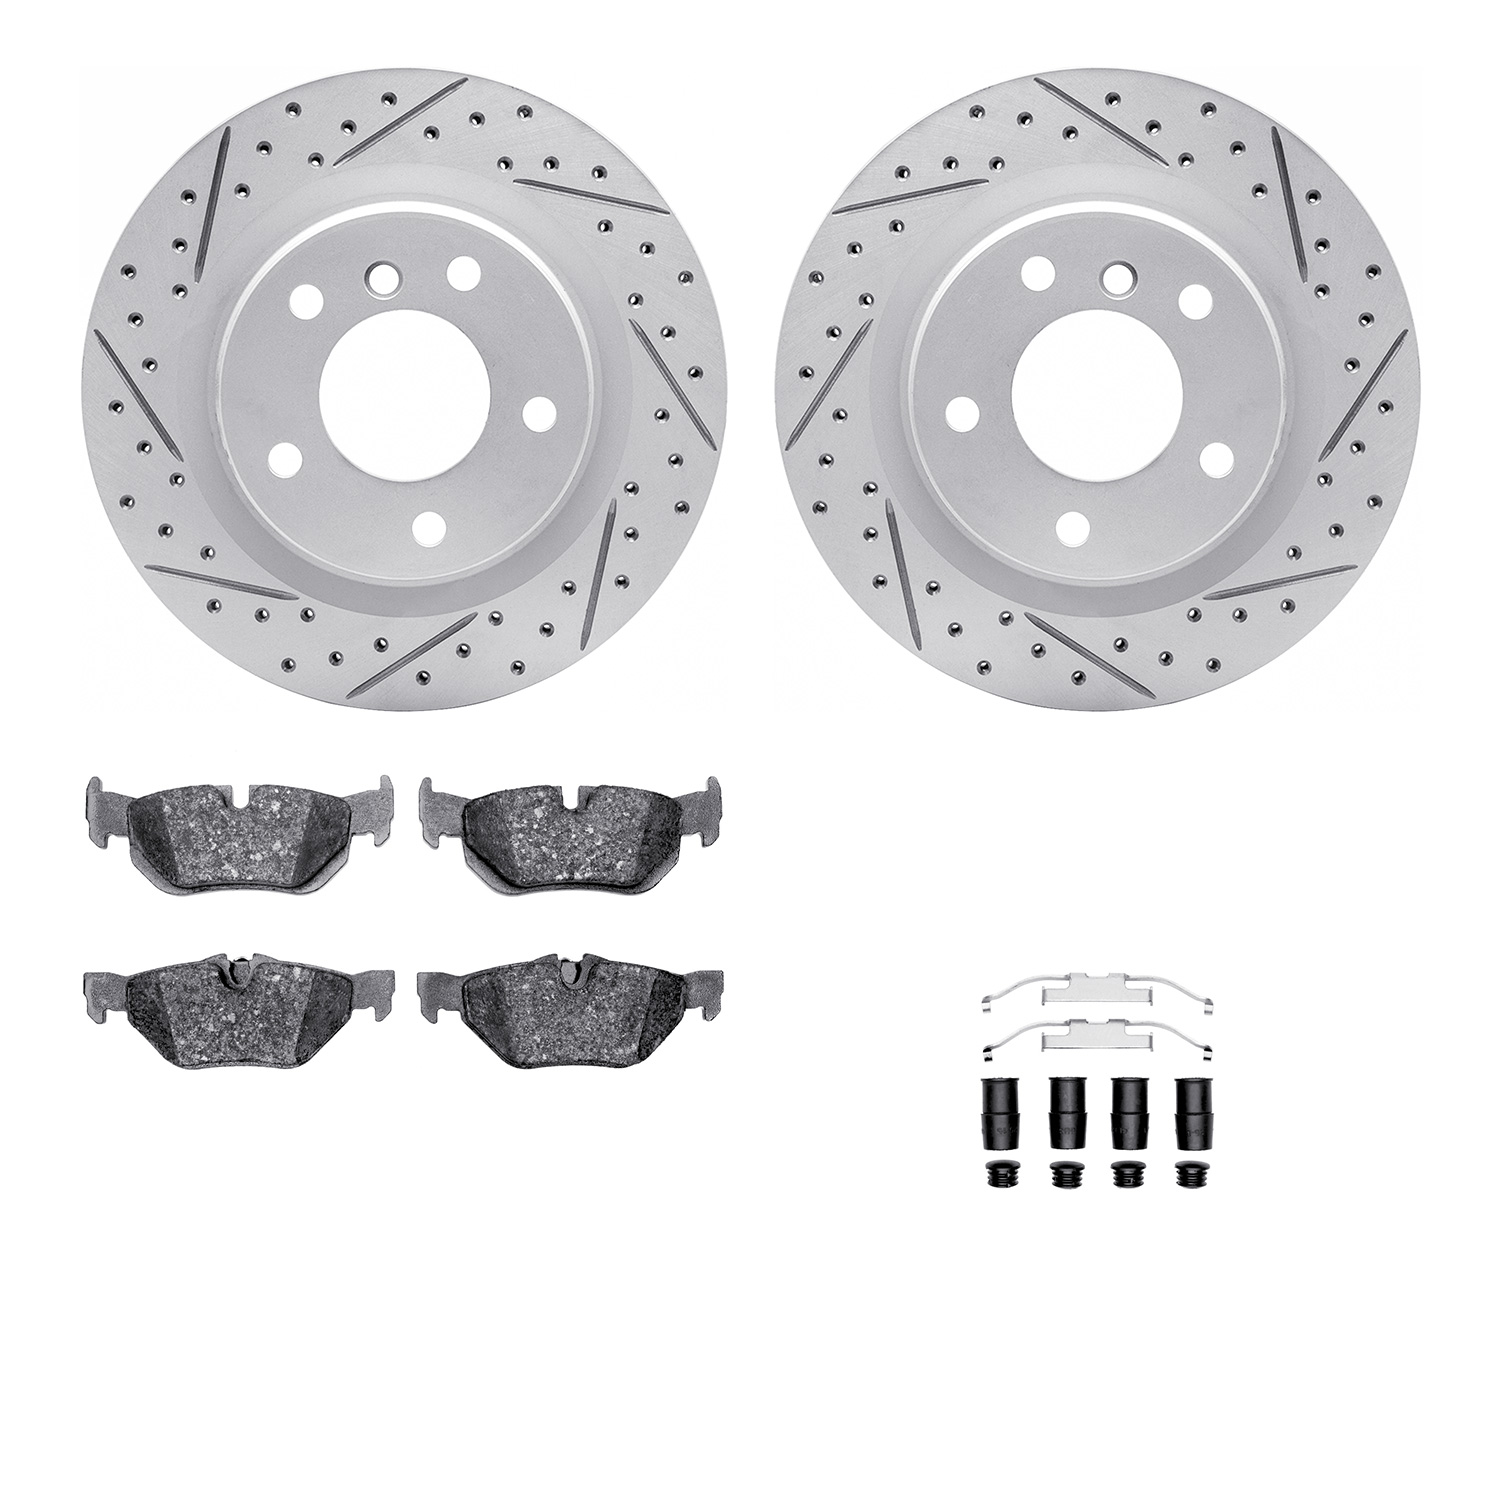 2512-31047 Geoperformance Drilled/Slotted Rotors w/5000 Advanced Brake Pads Kit & Hardware, 2006-2013 BMW, Position: Rear